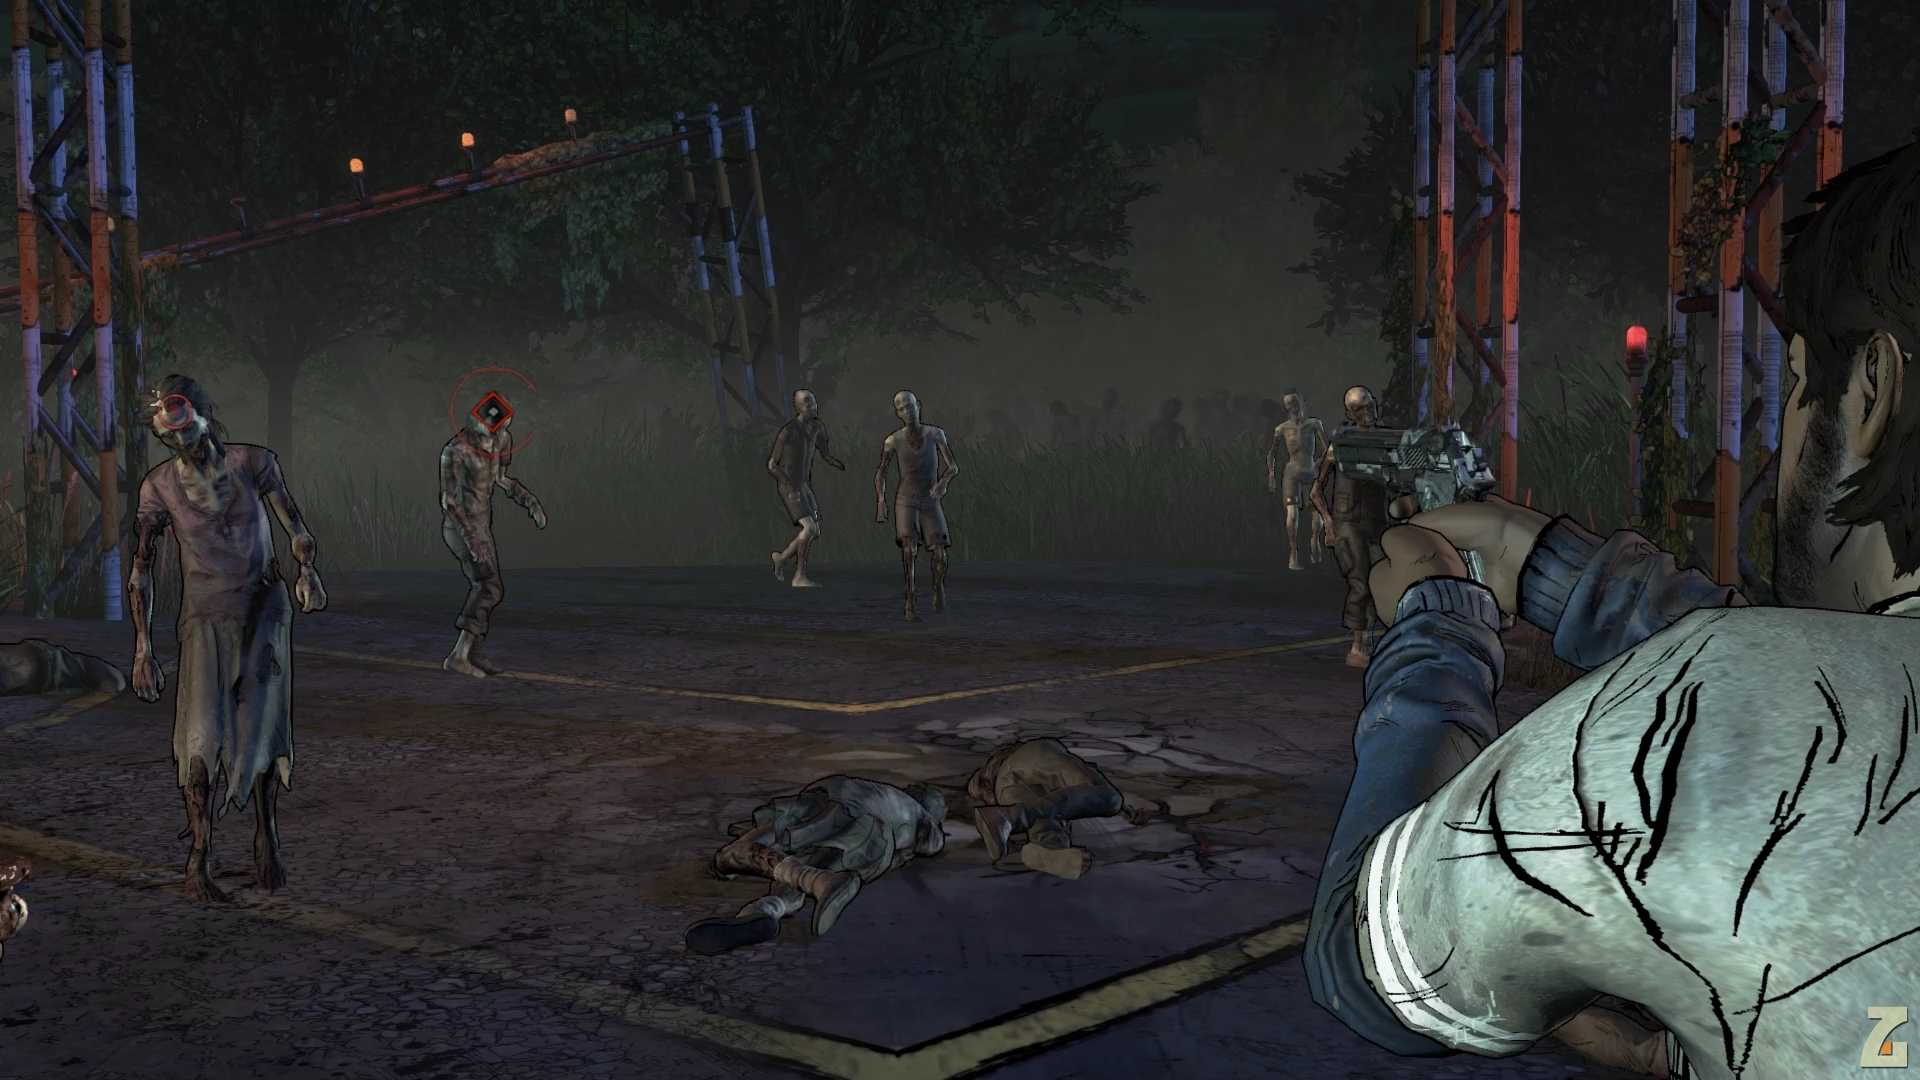 The Walking Dead: A New Frontier — Episode 5: From the Gallows